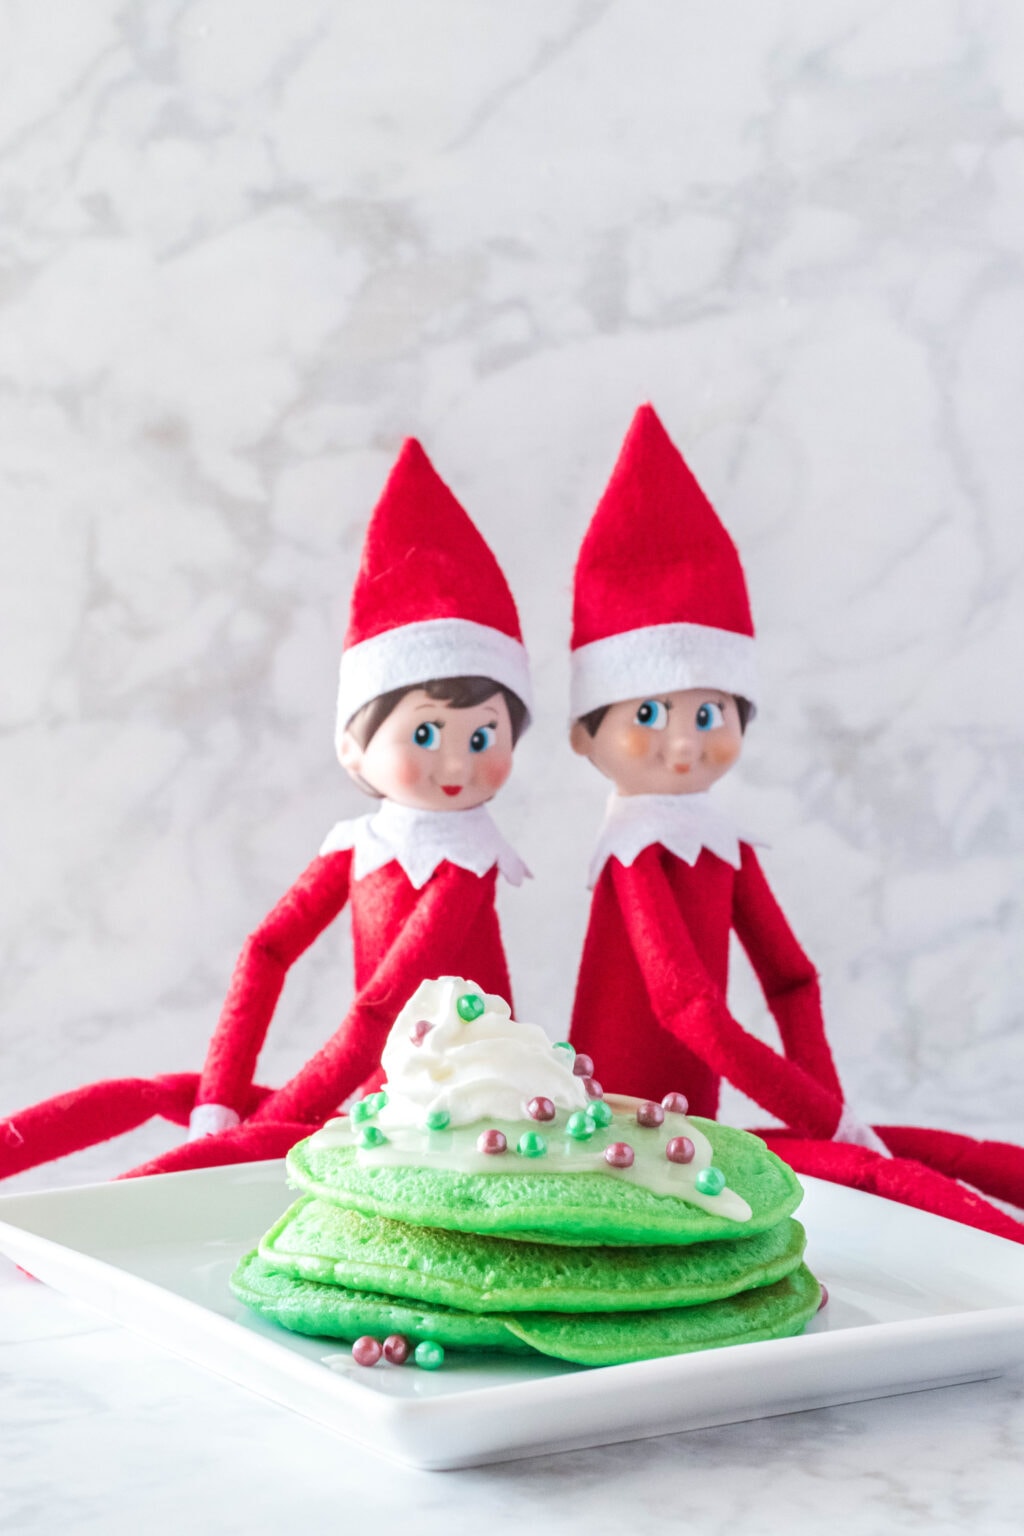 two elf on the shelf dolls with elf on the shelf pancakes